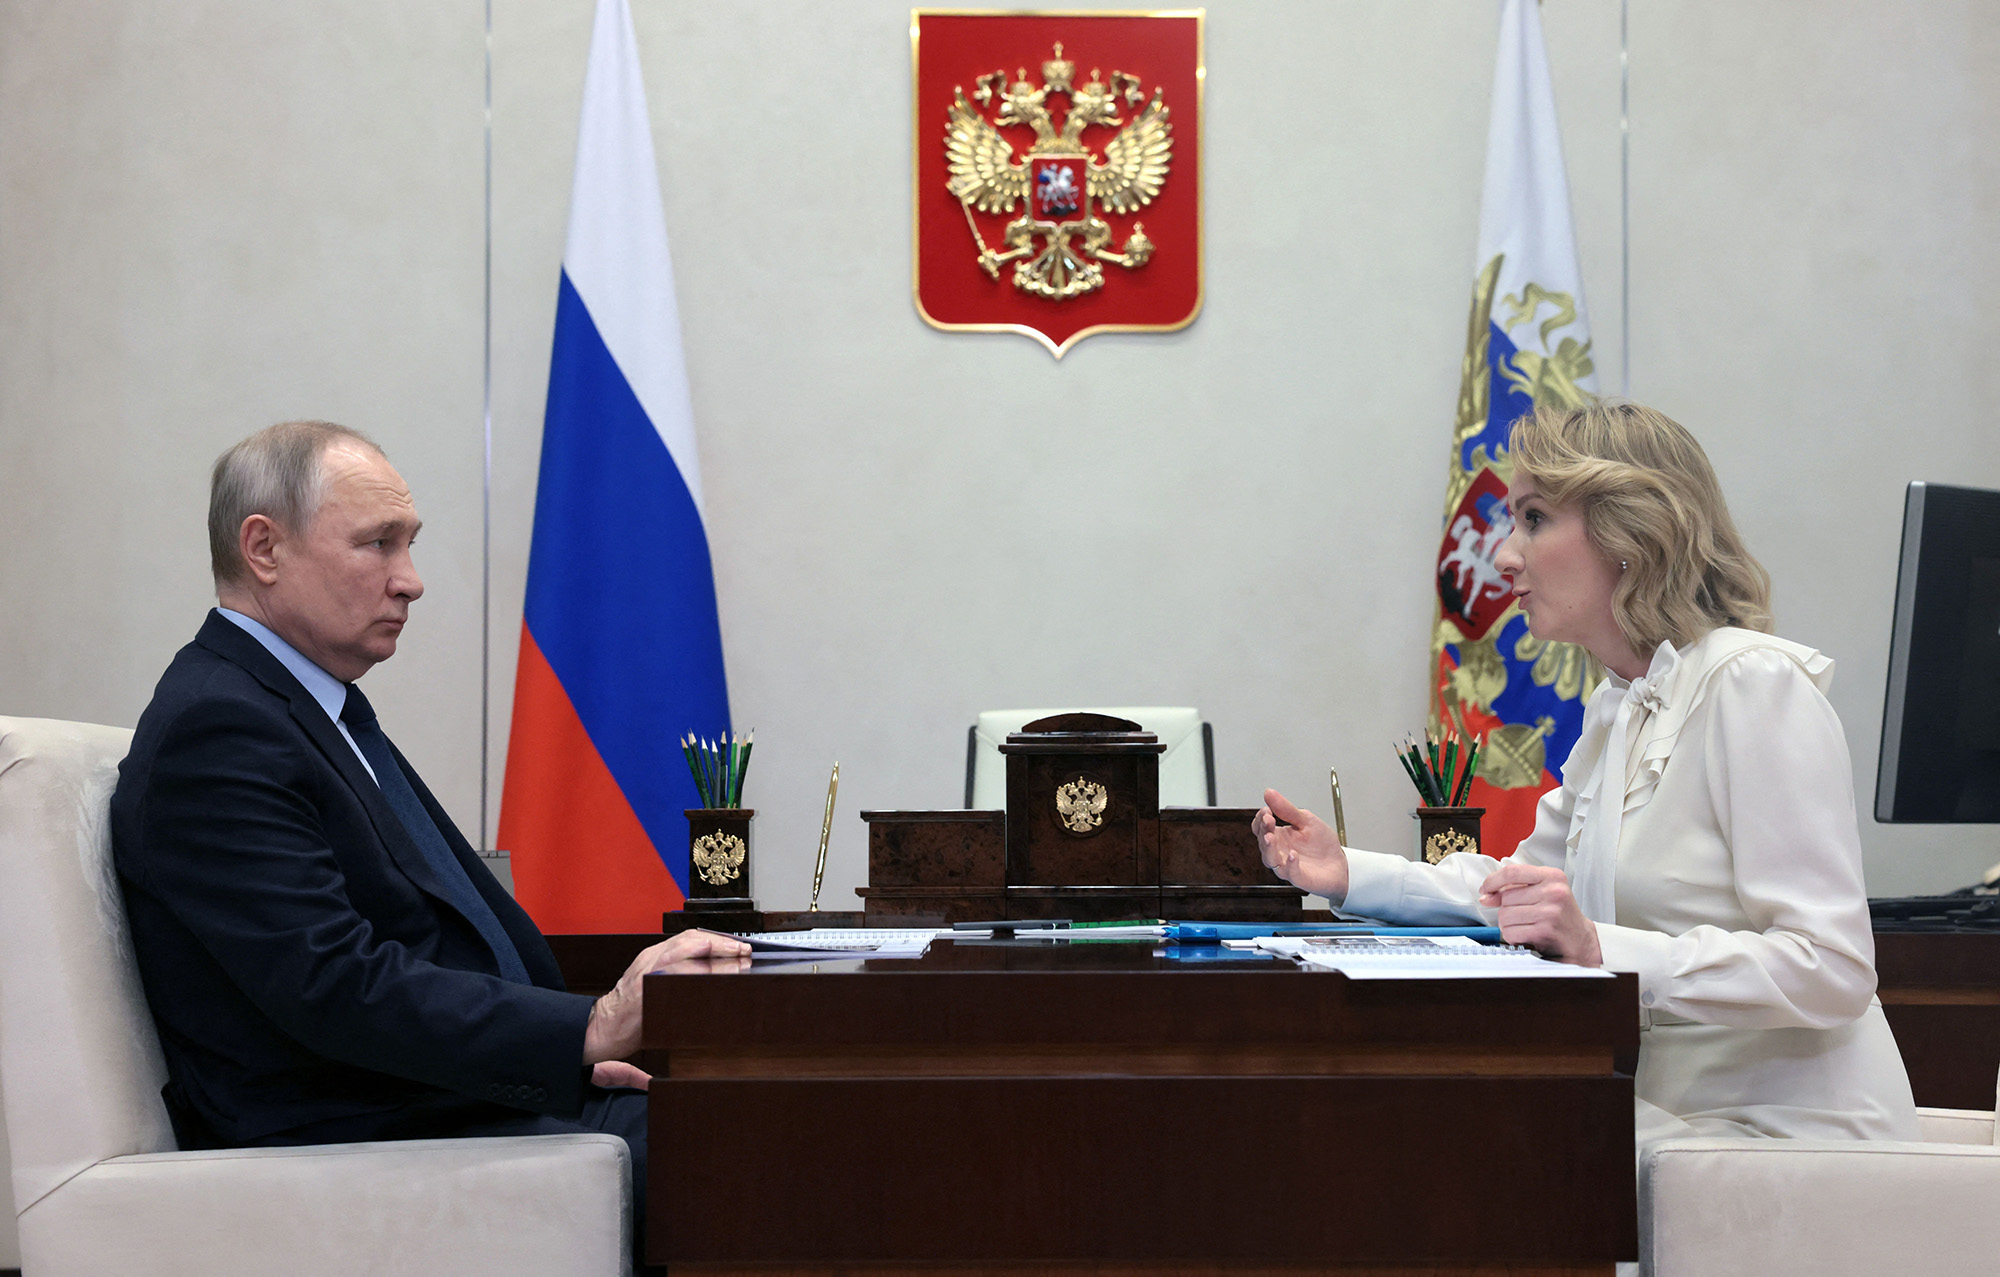 Russian President Vladimir Putin meets with Maria Lvova-Belova, Russian children's rights commissioner, at the Novo-Ogaryovo state residence, outside Moscow, Russia, on February 16.